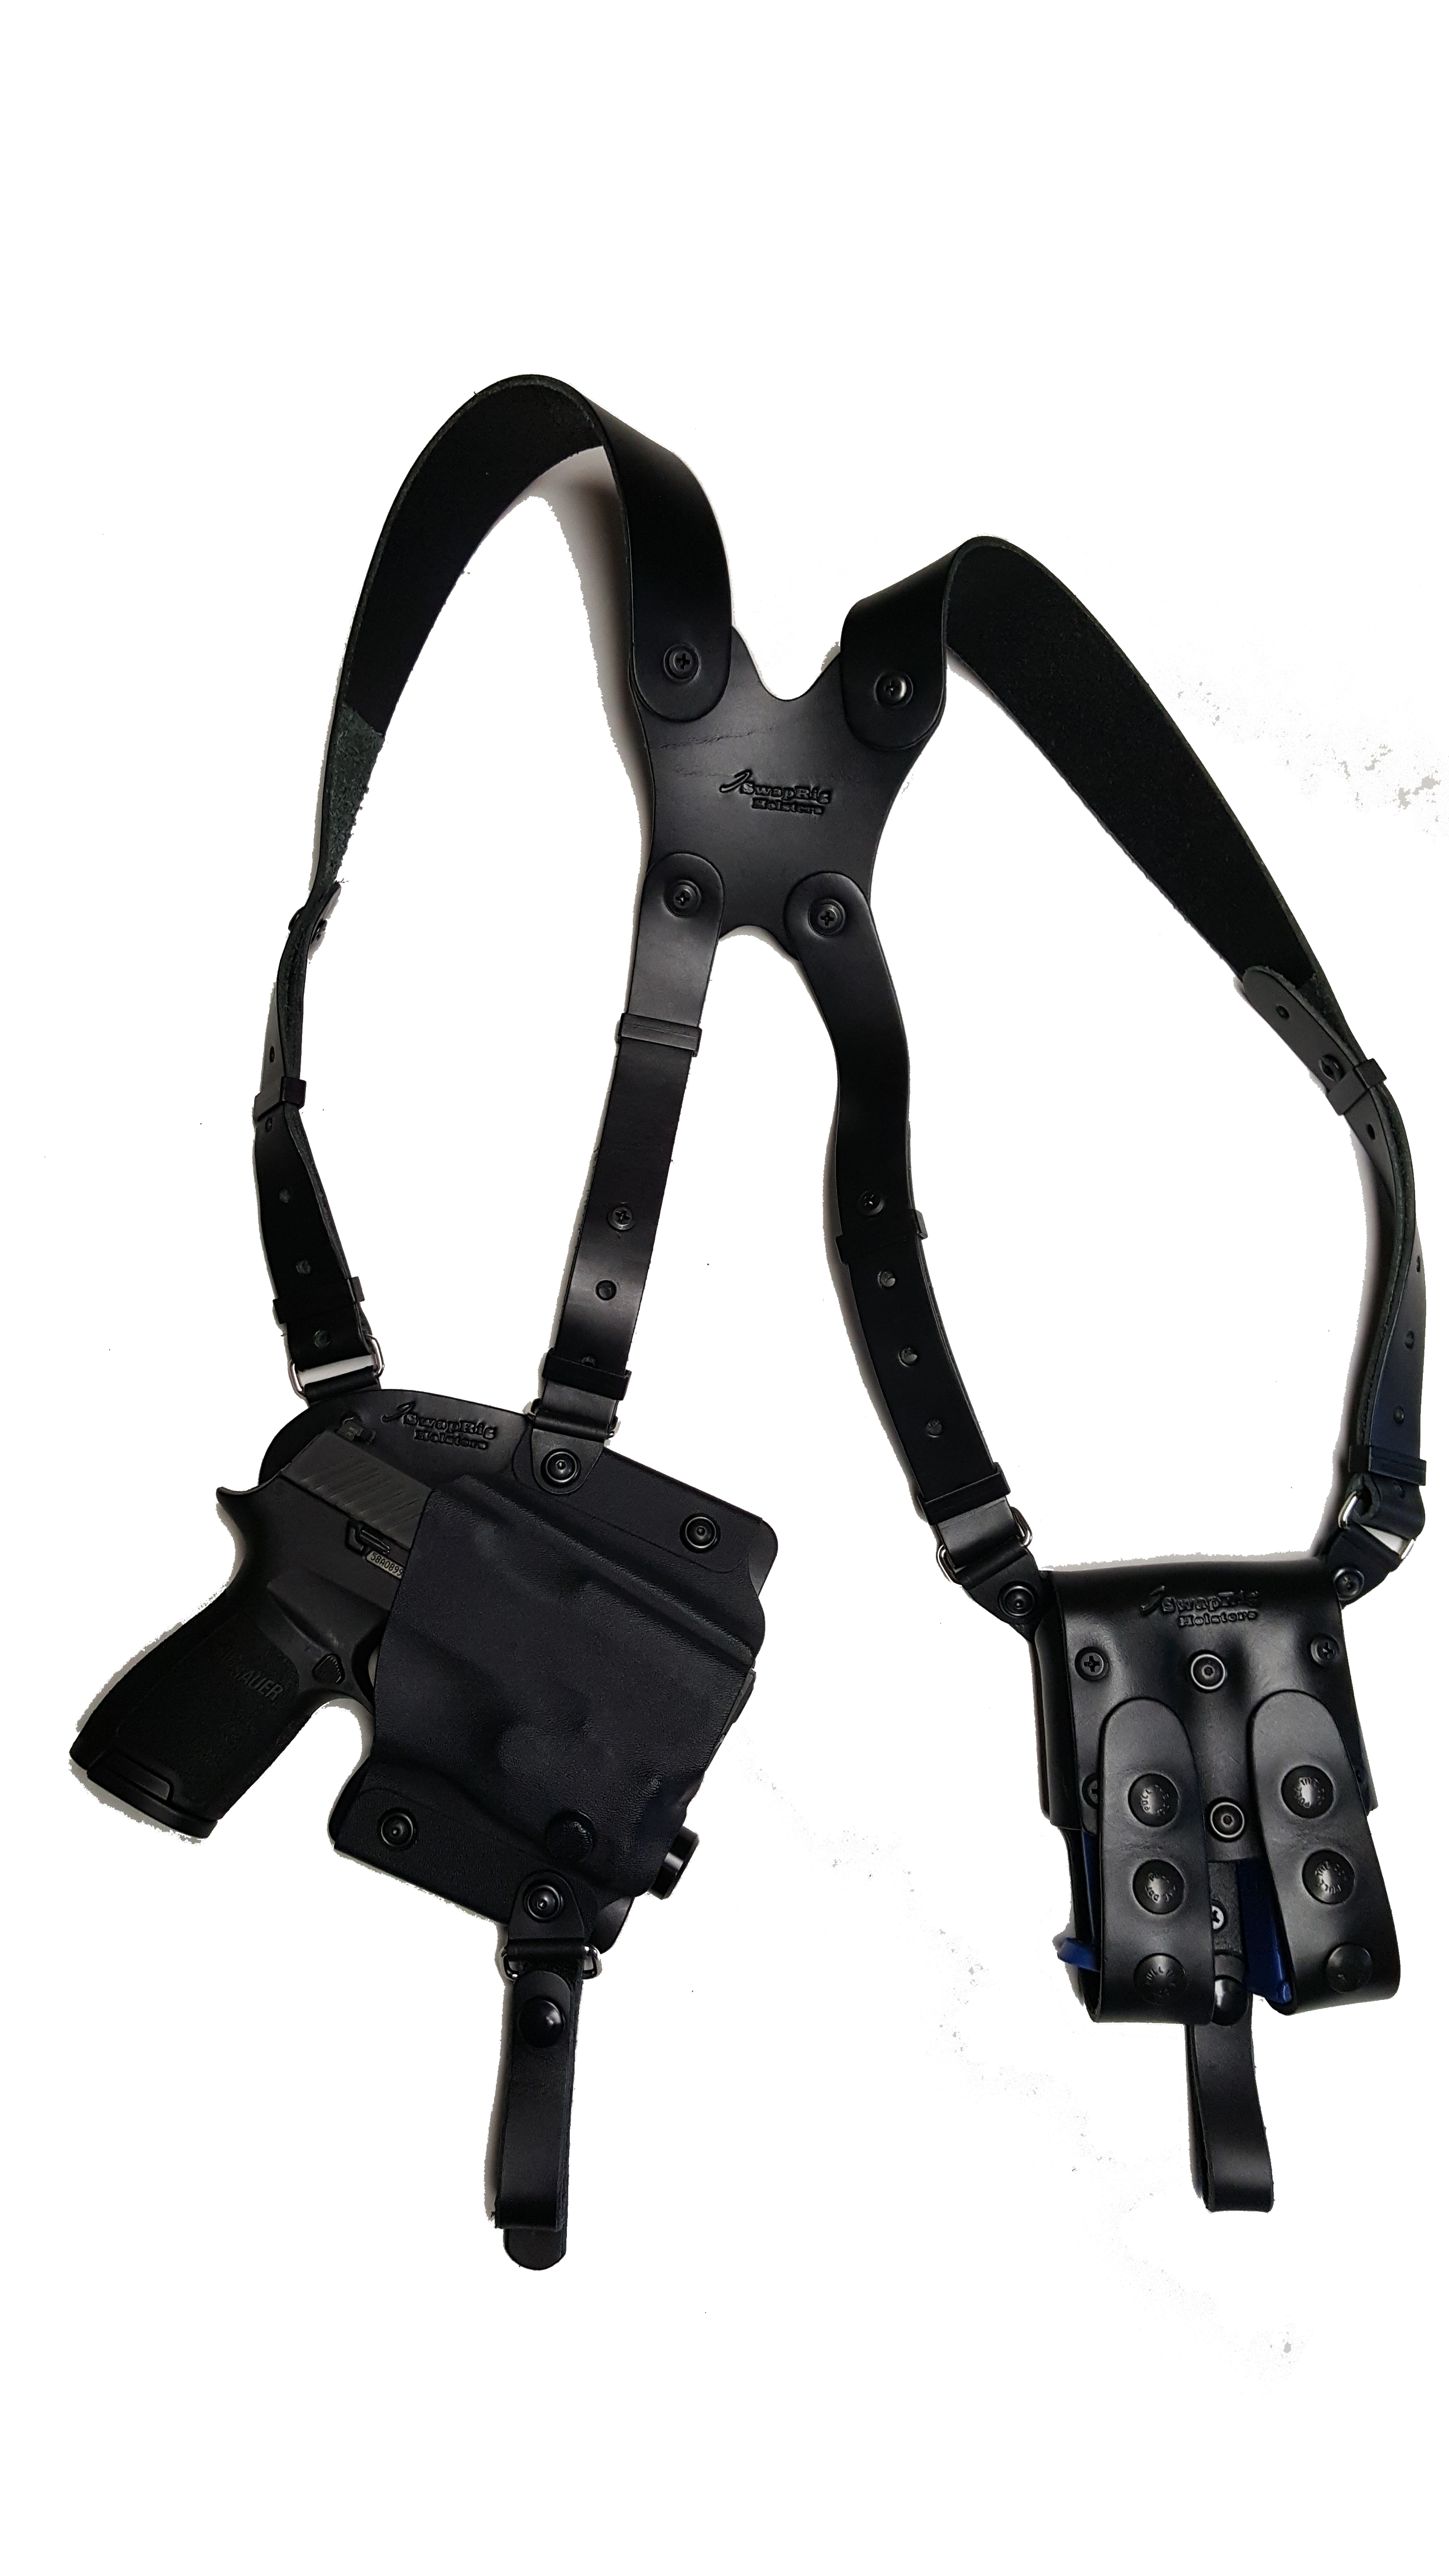 Smith & Wesson 40 9mm Bulldog Shoulder Holster With Double Magazine Holder for sale online 